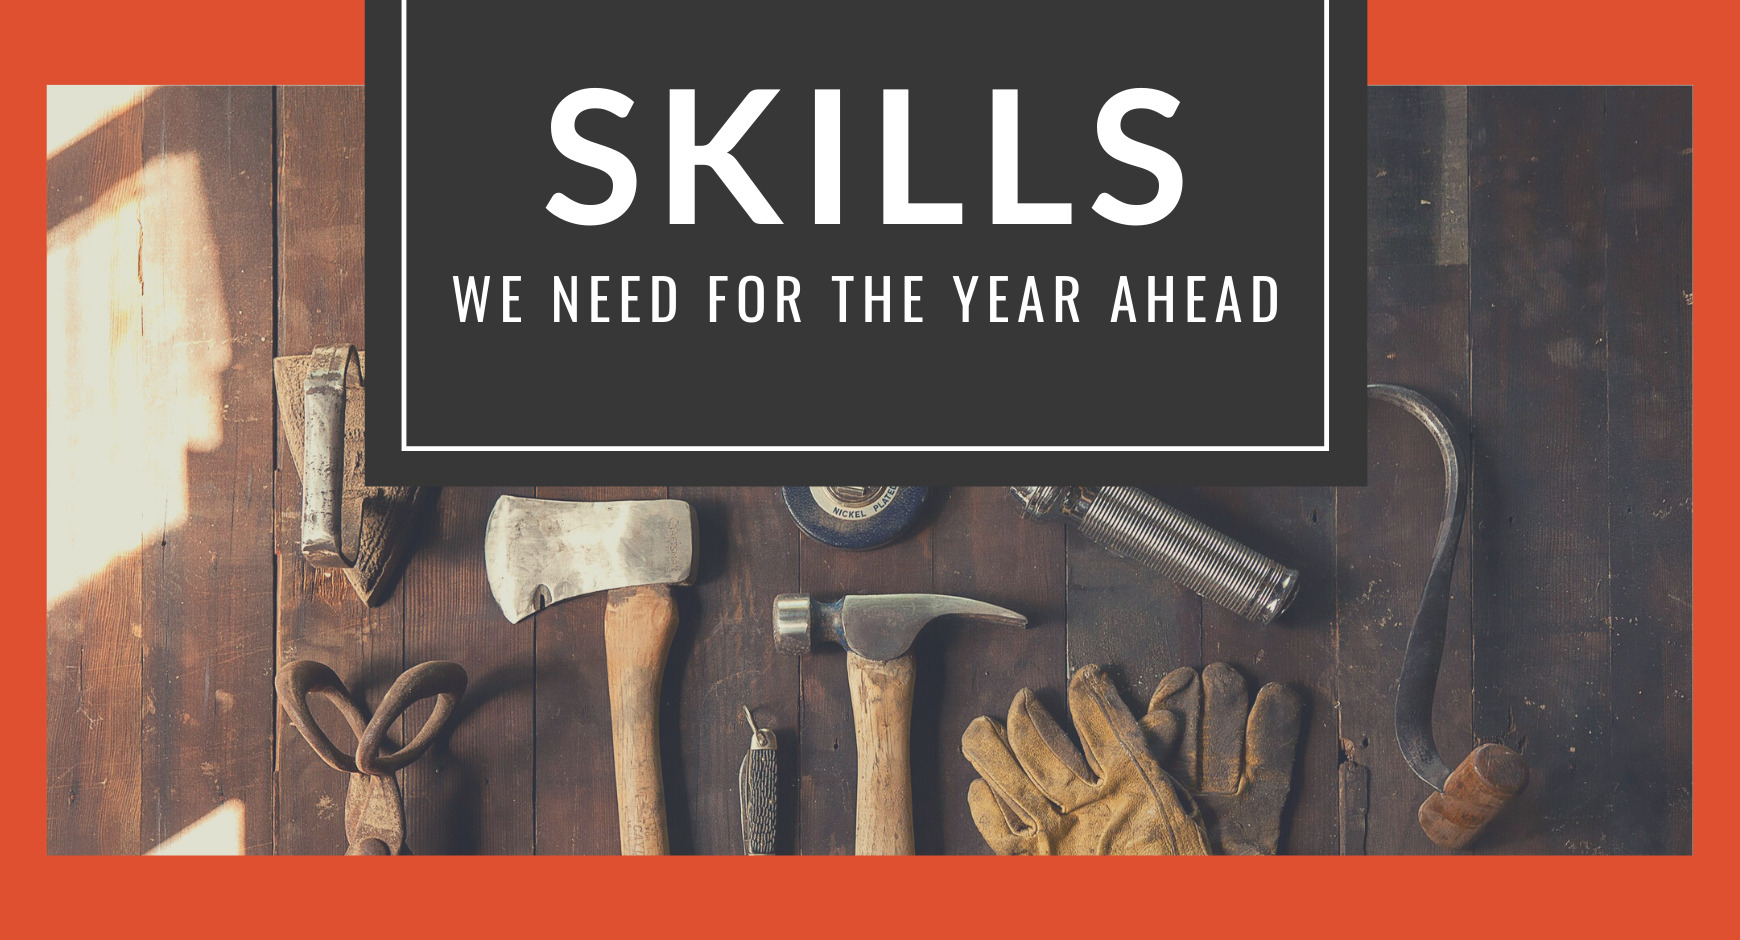 A set of tools under words that read "Skills We Need for the Year Ahead"